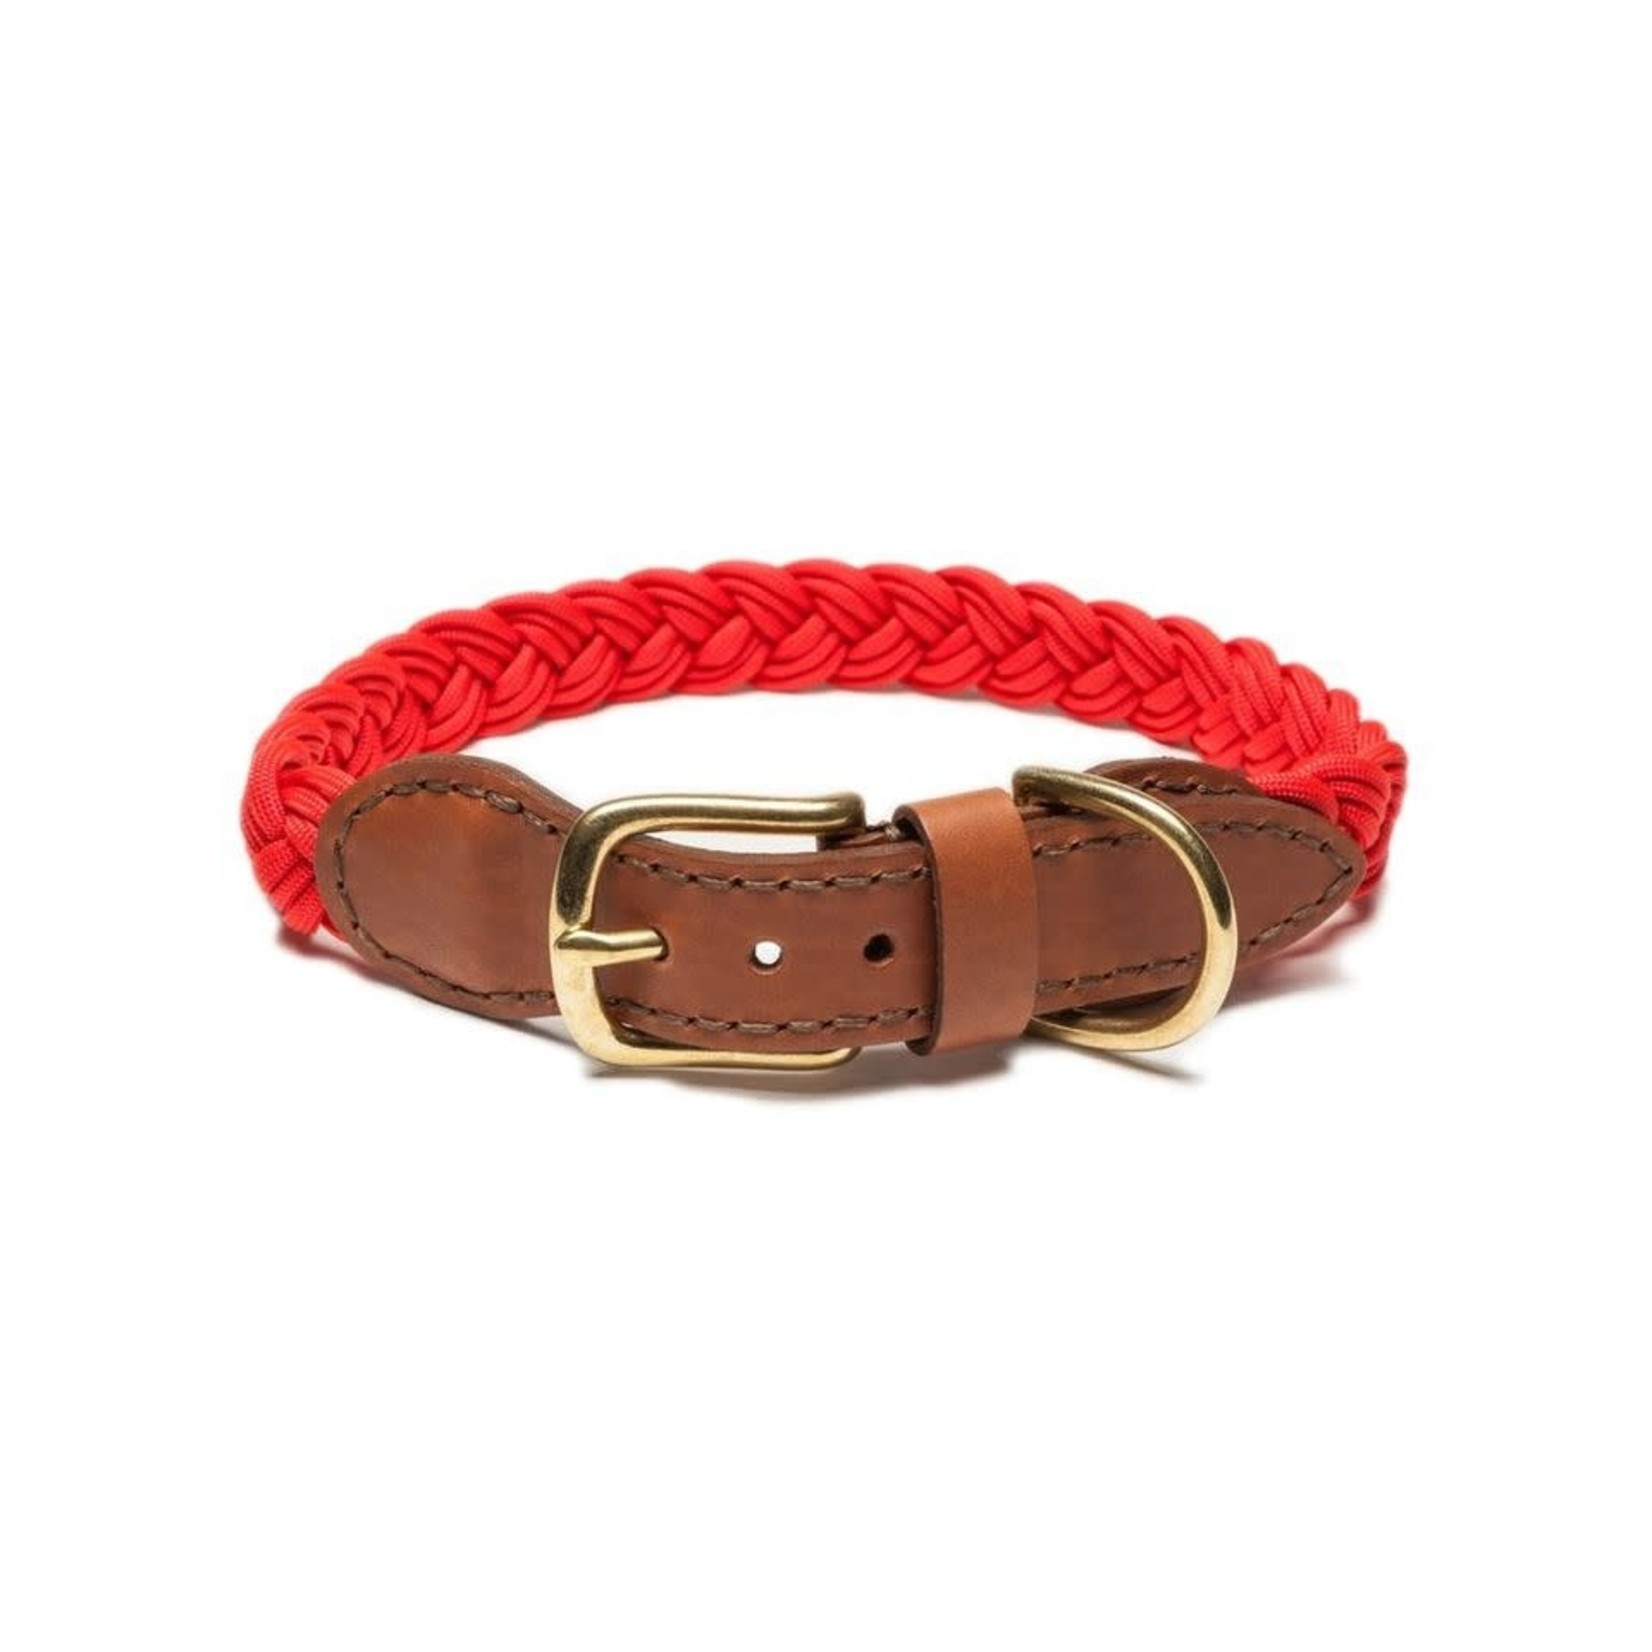 Knotty Pets Knotty Pets - Braided Collar - Red